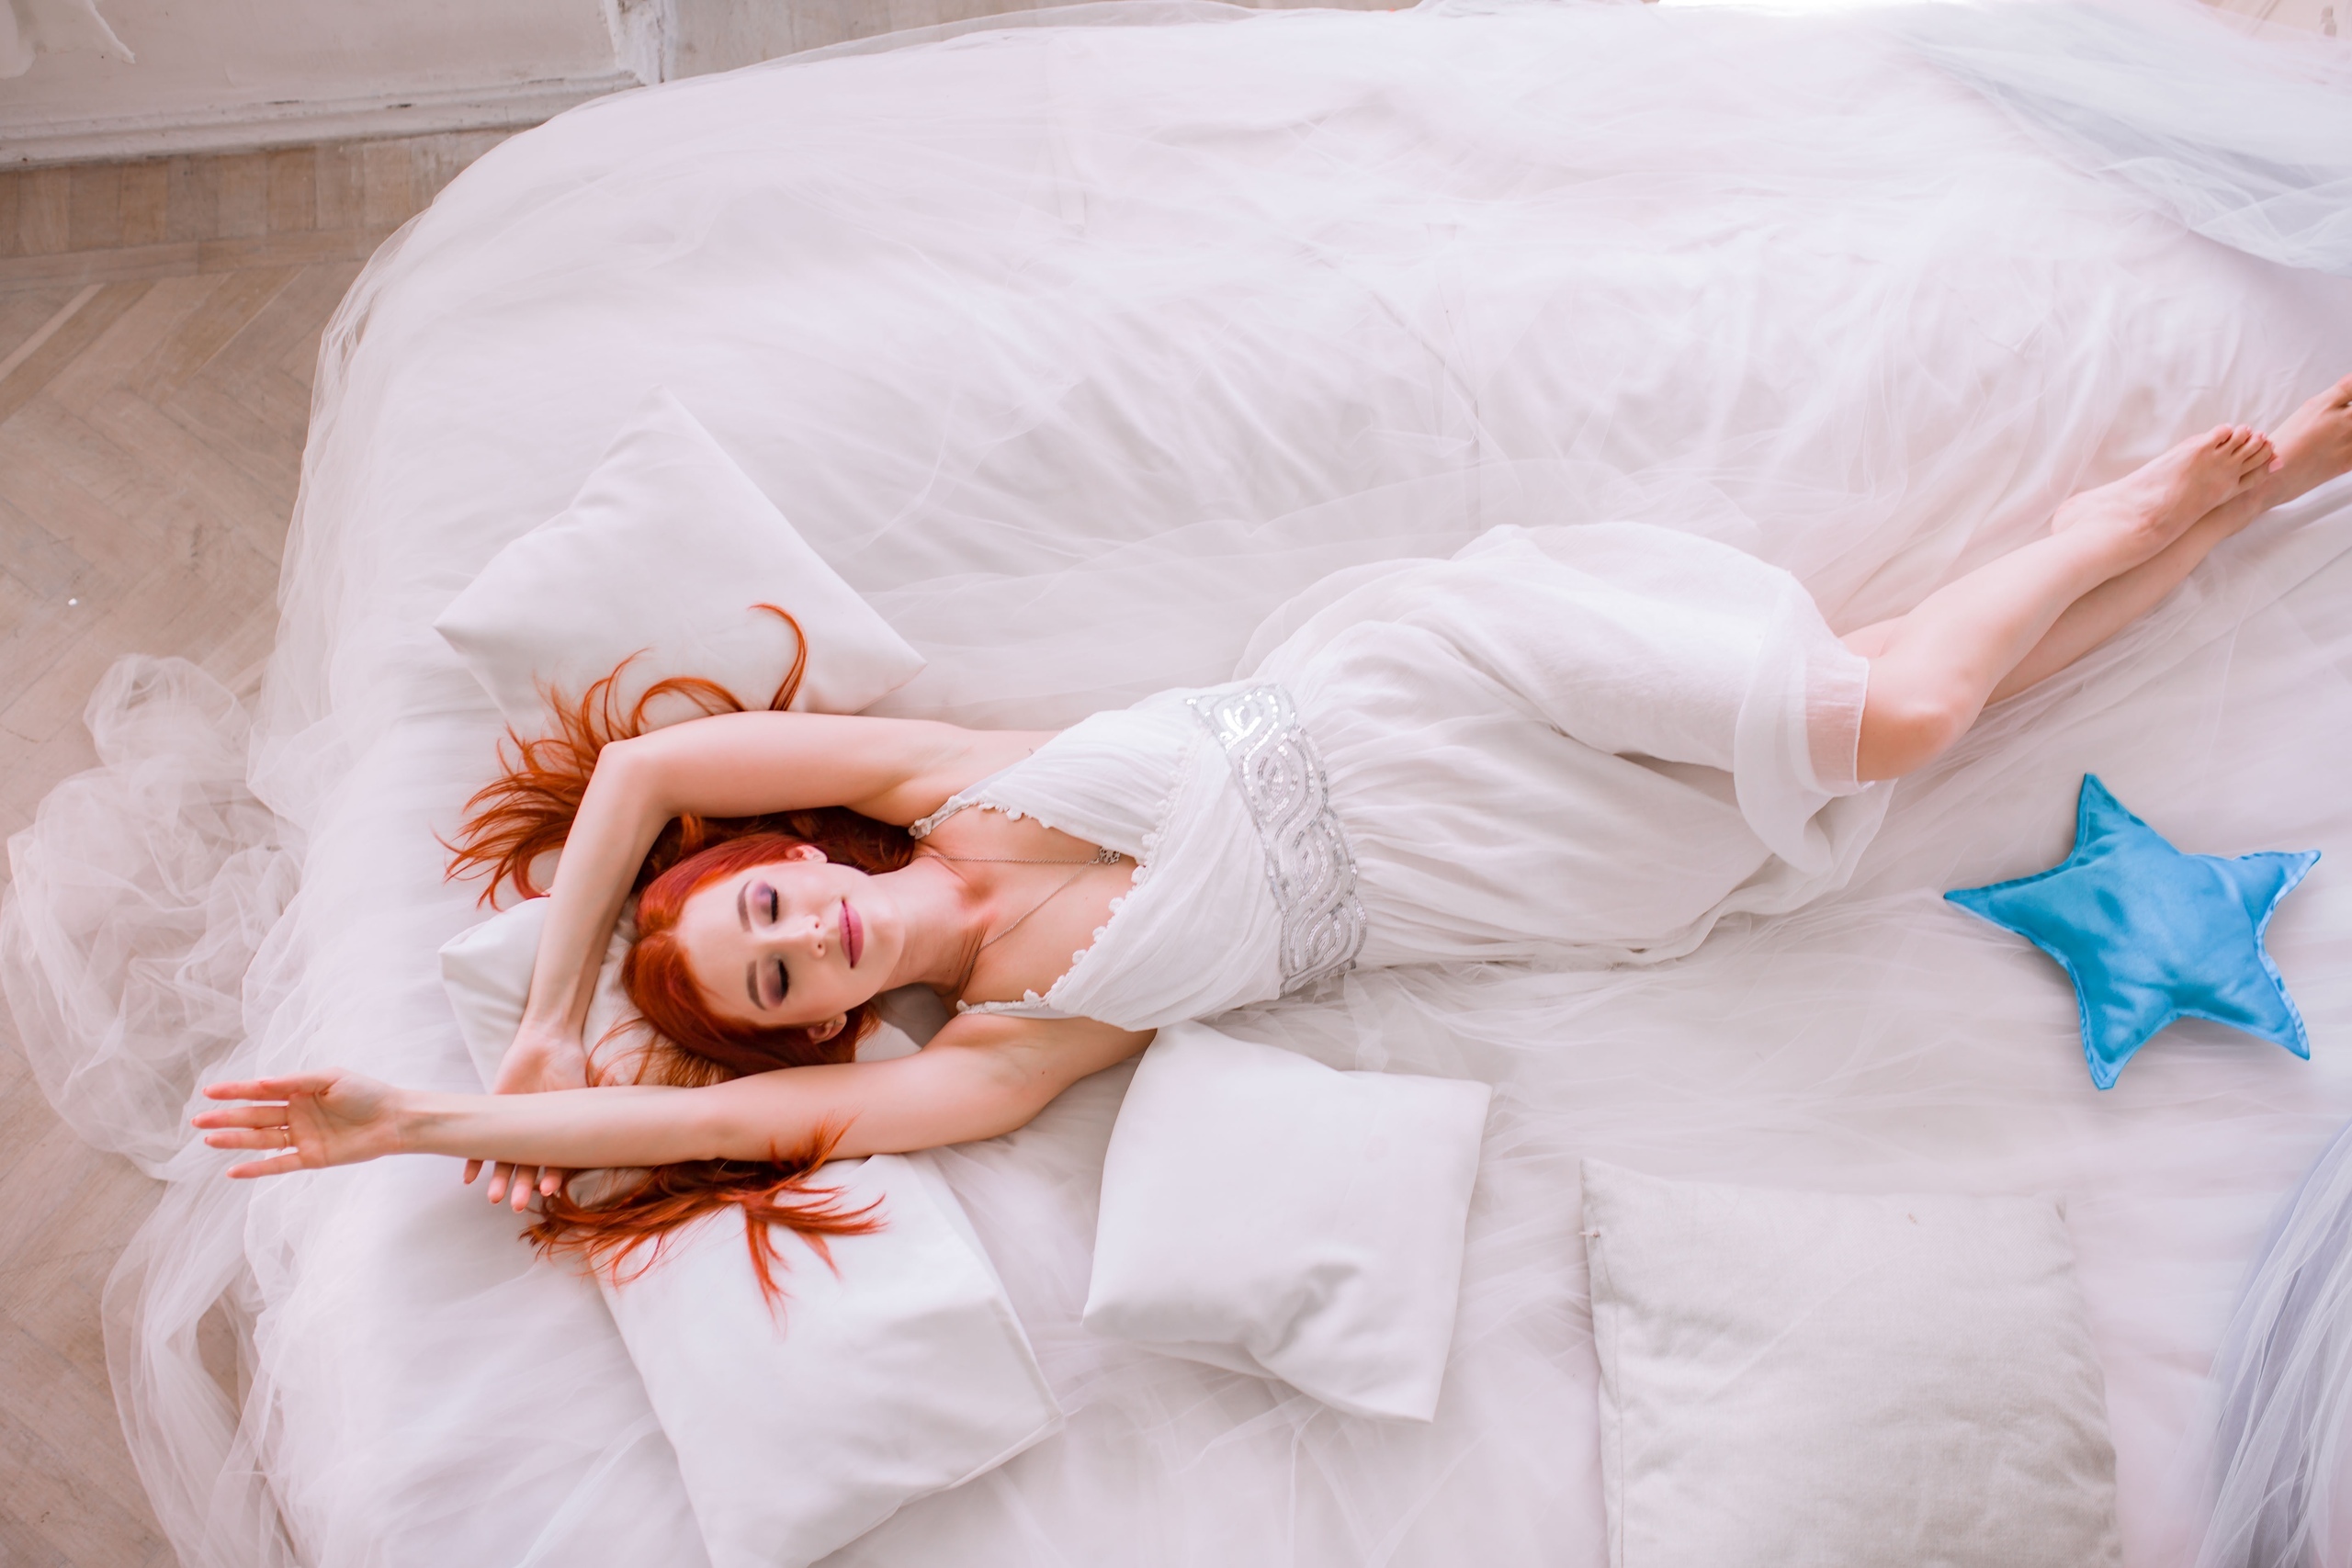 Women Model Redhead Indoors Closed Eyes Smiling Necklace Dress White Dress Pillow In Bed Top View Be 2560x1707